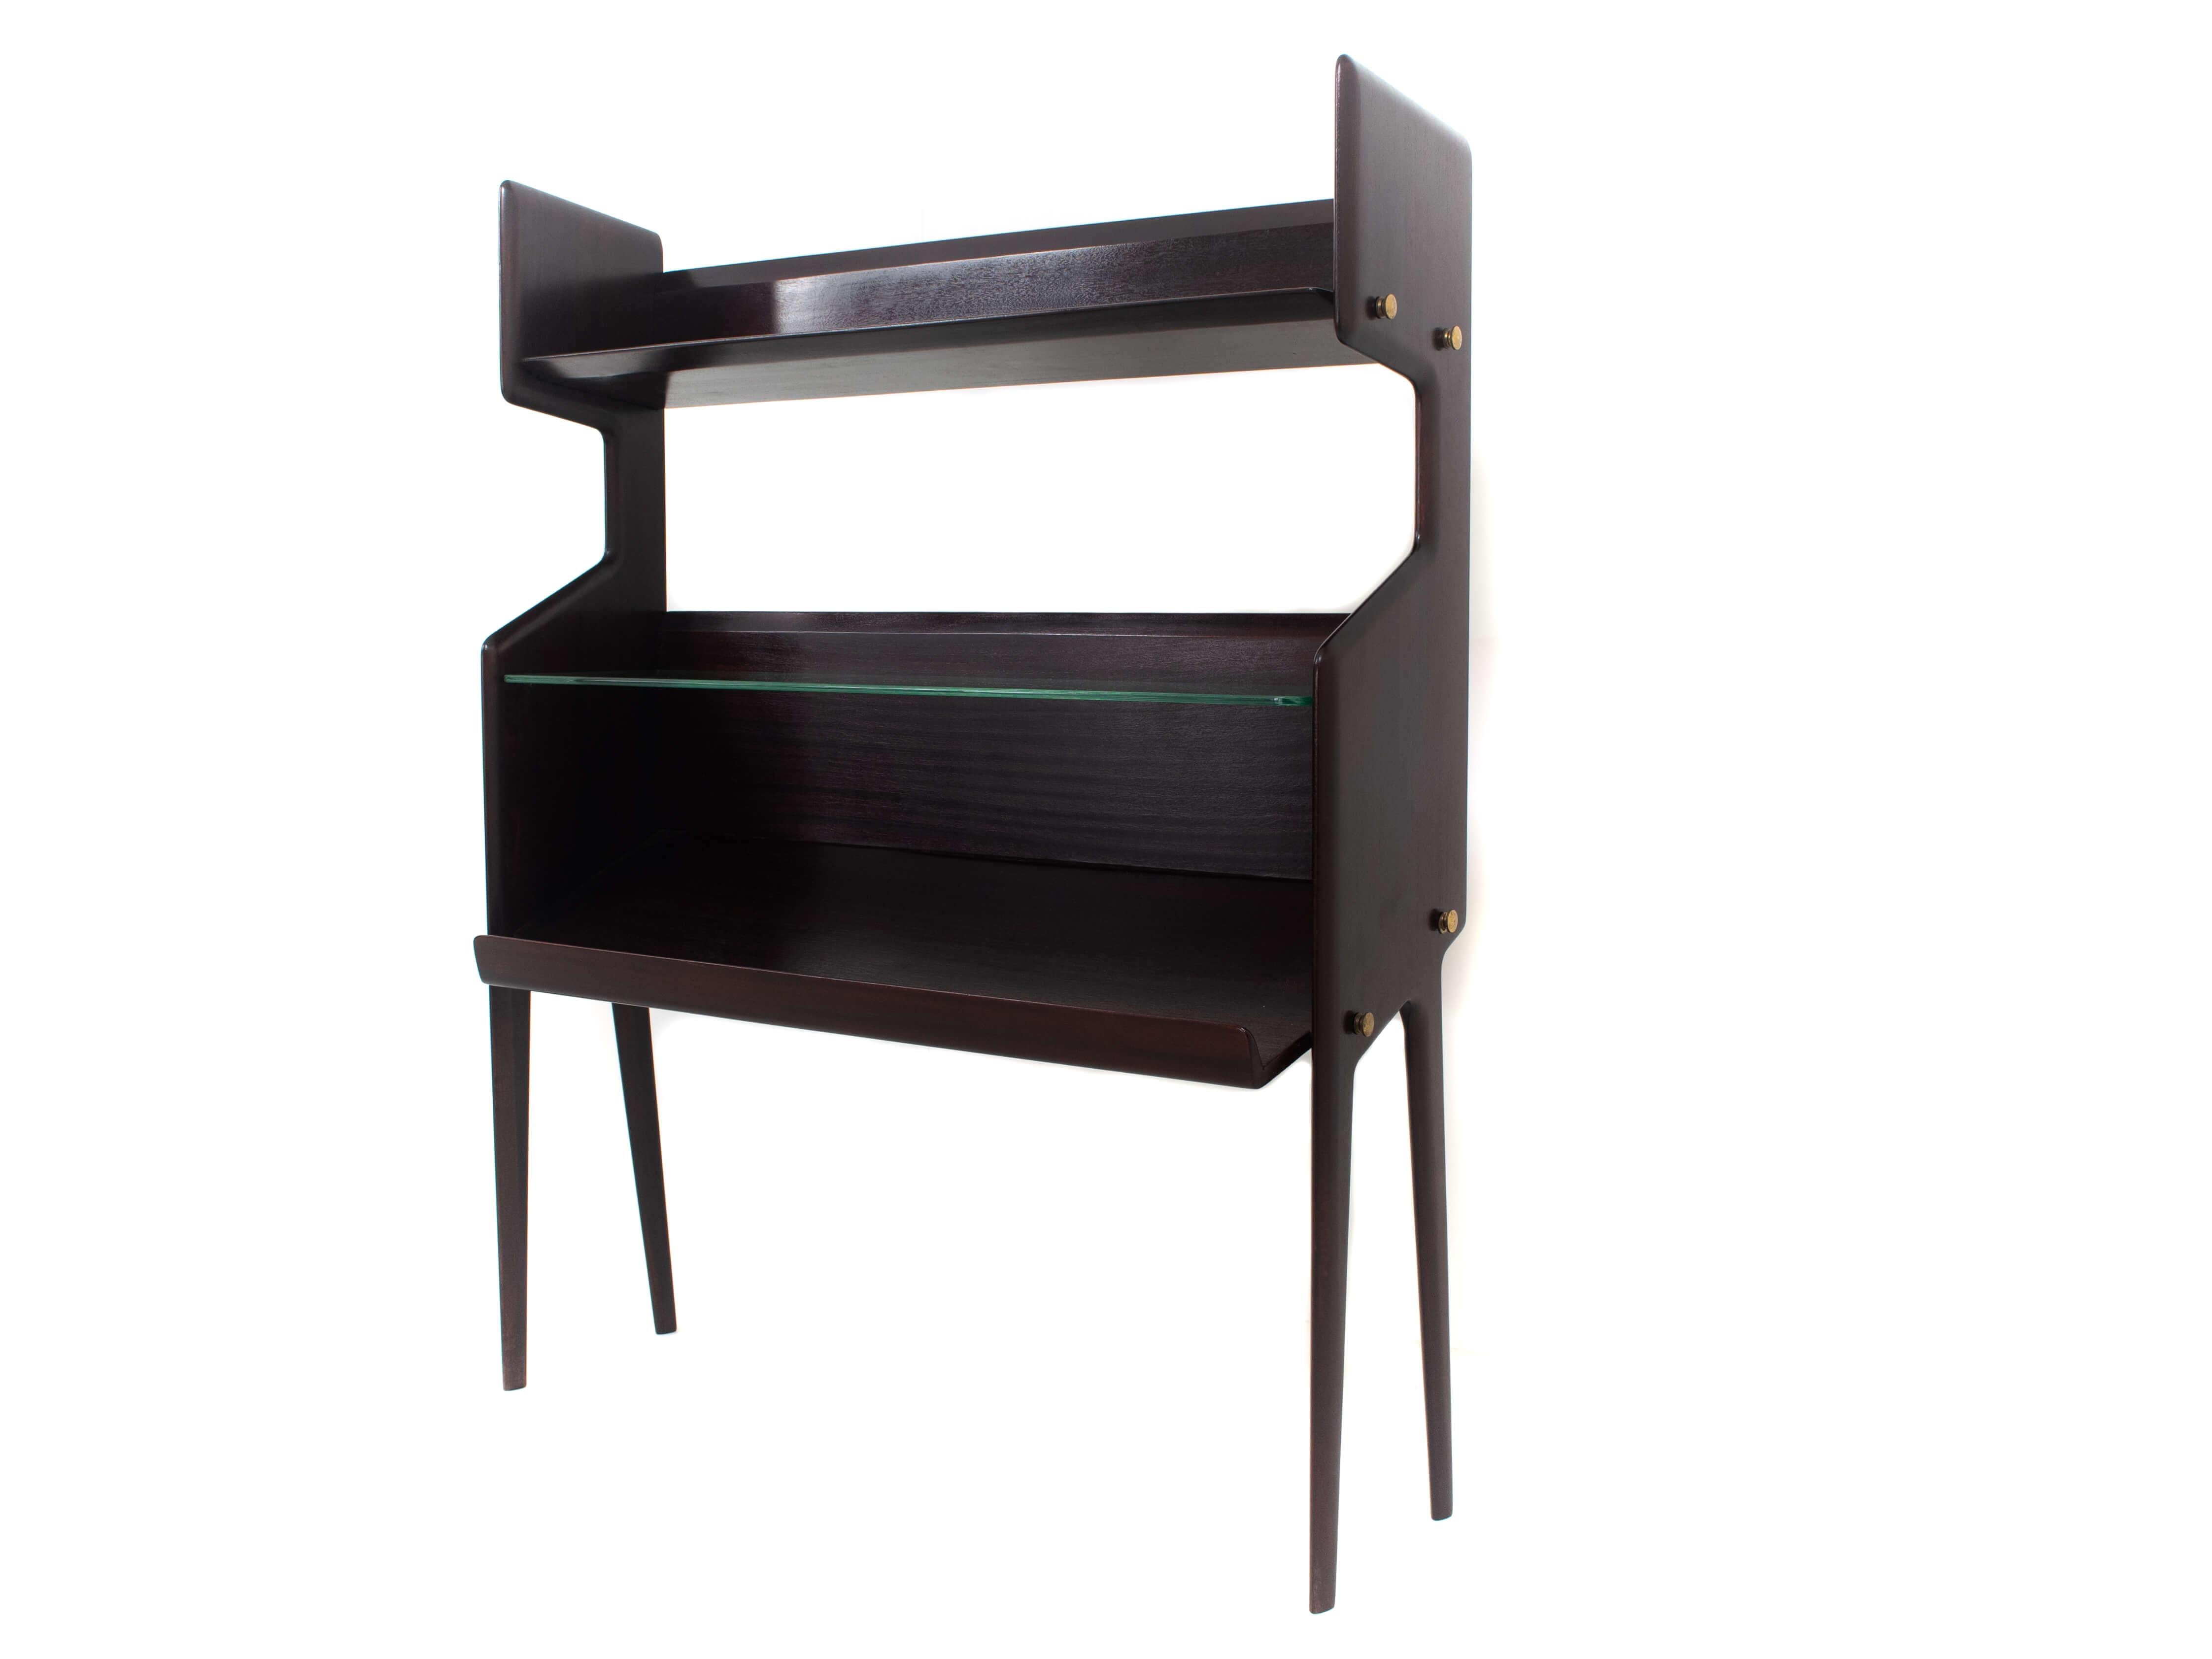 Charming Italian Modern Ico Parisi bookcase model 459 in Mahogany Veneer. This bookcase is manufactured by Angelo de Baggis Cantu in Italy in 1955/1956. It has two solid wood carved sides supporting the elegant legs that are typical for Ico Parisi